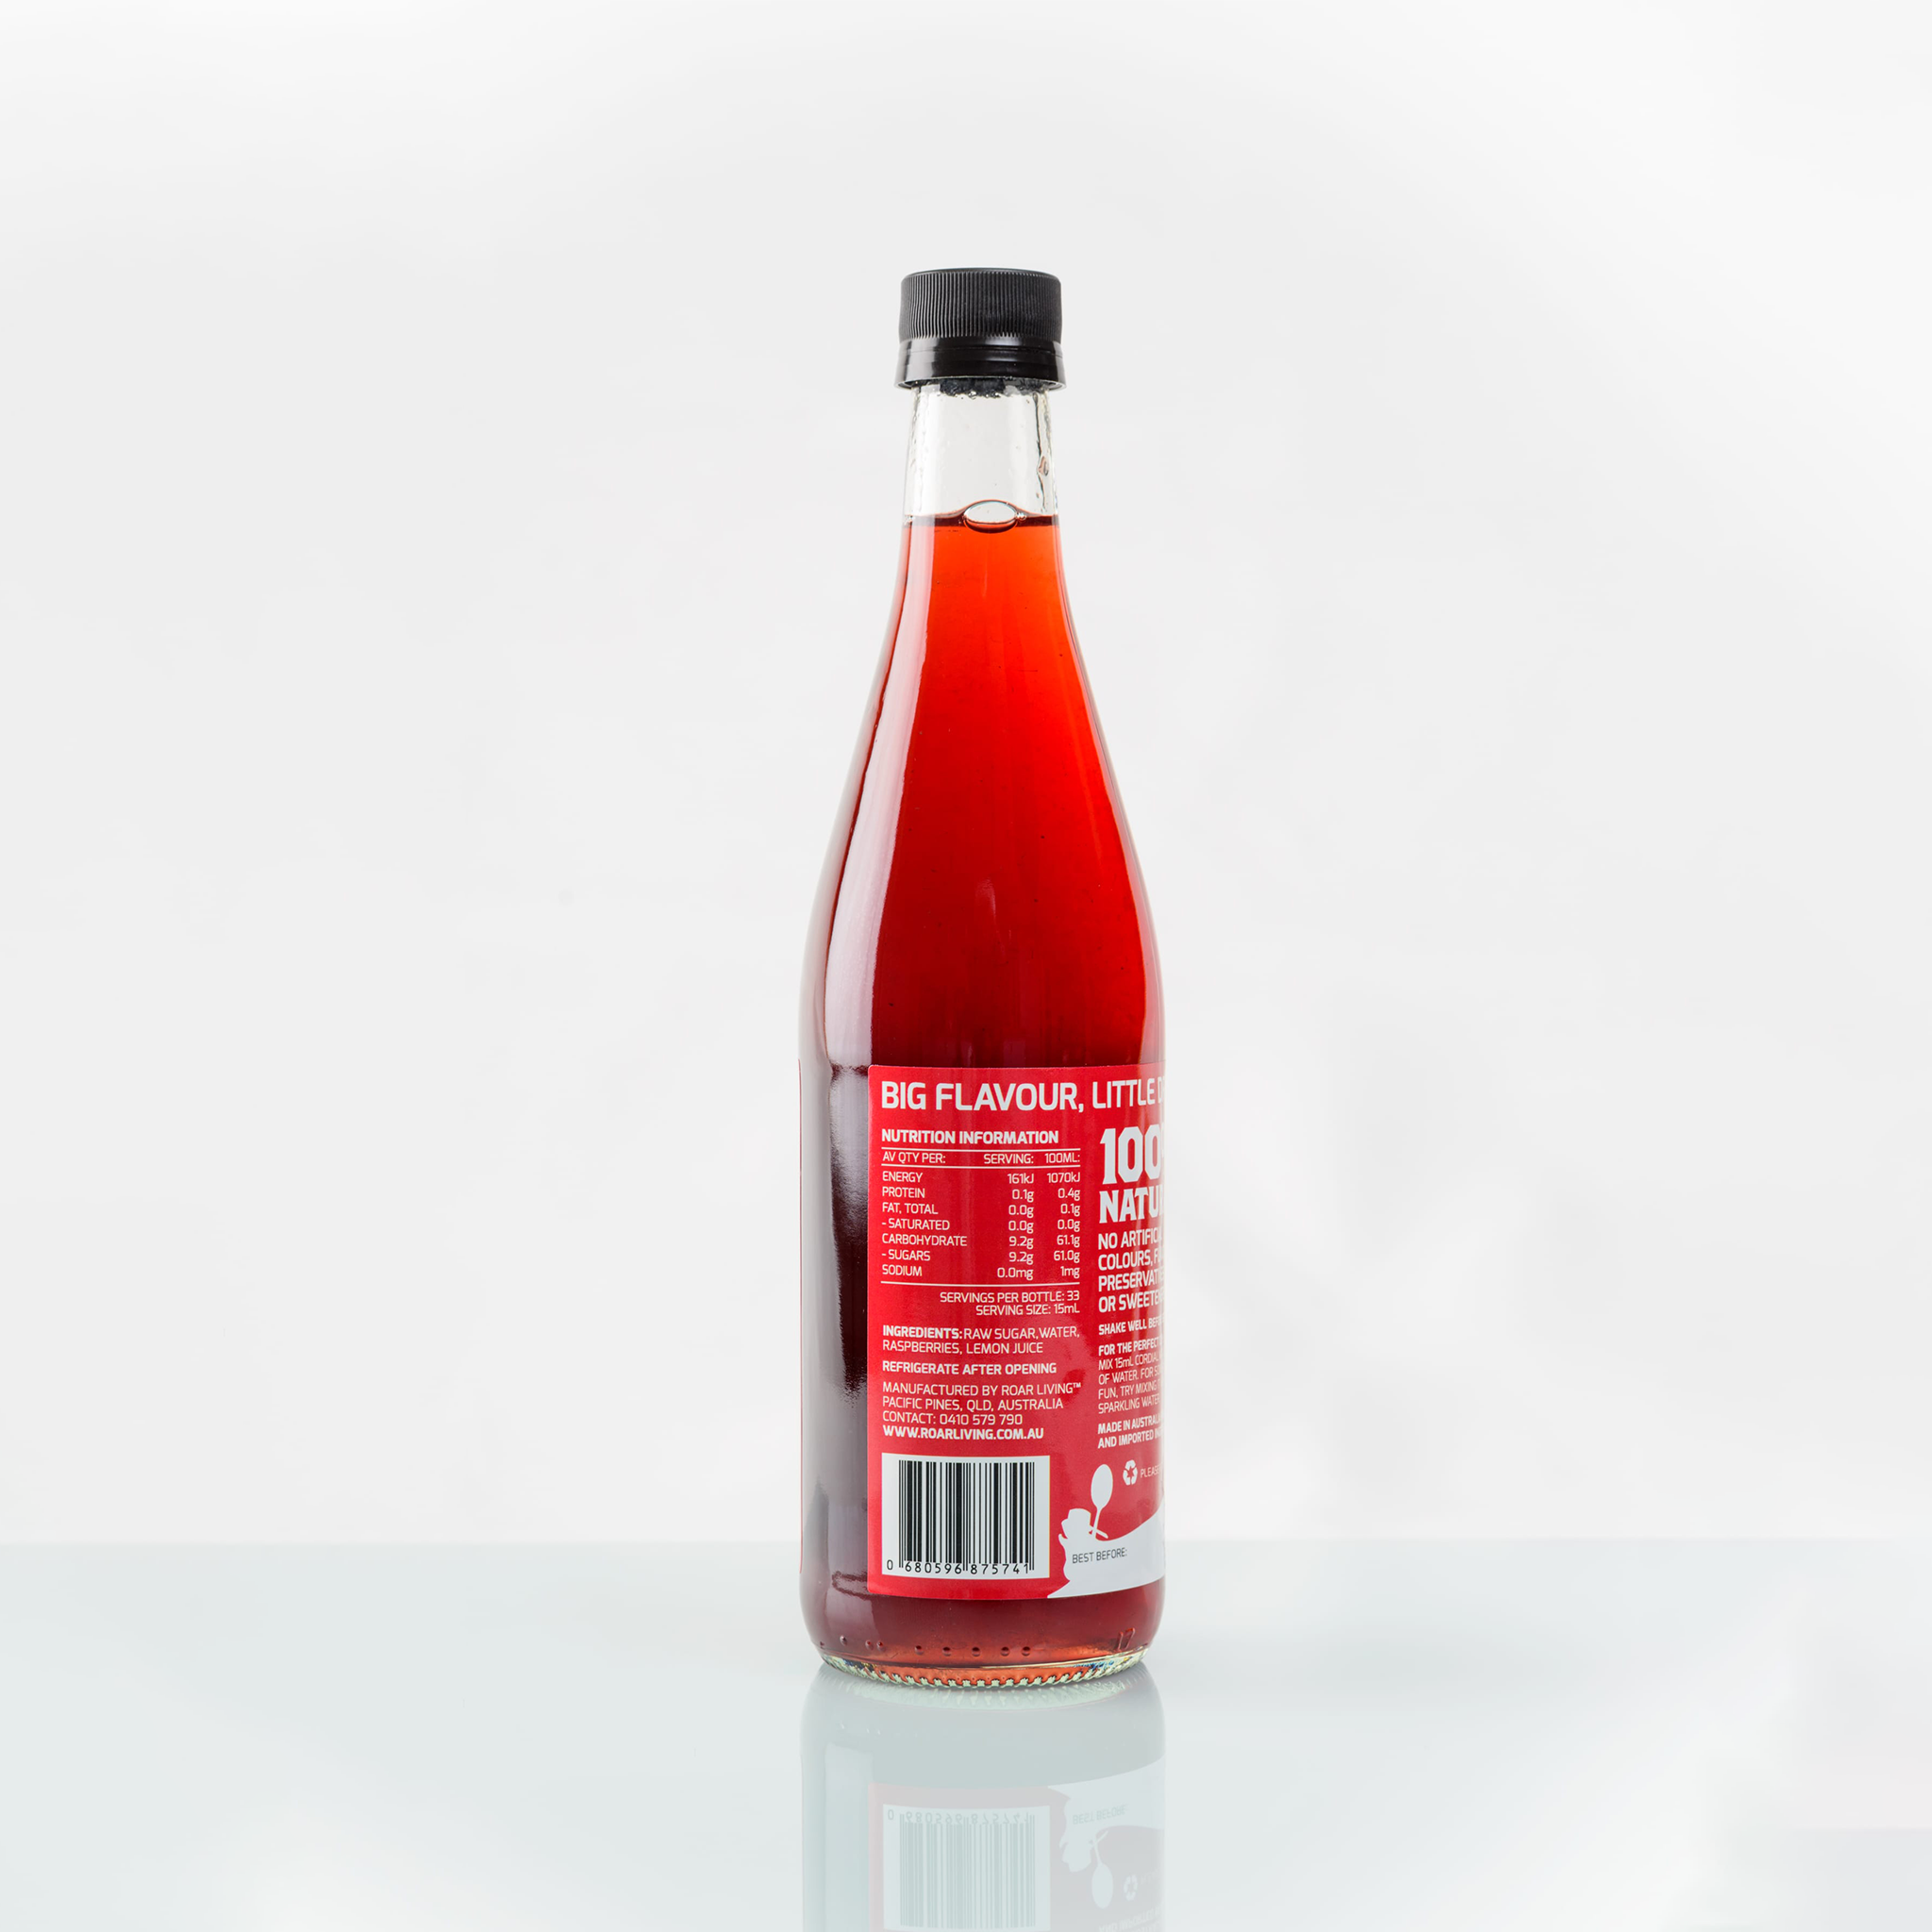 Roar Living 100% natural raspberry cordial back of bottle. Ingredients list, Raw sugar, water, raspberries and lemon juice. Completely free from any synthetic 'ingredients'. Australia's family favourite Roar Living cordials is raspberry, convenience without compromise.